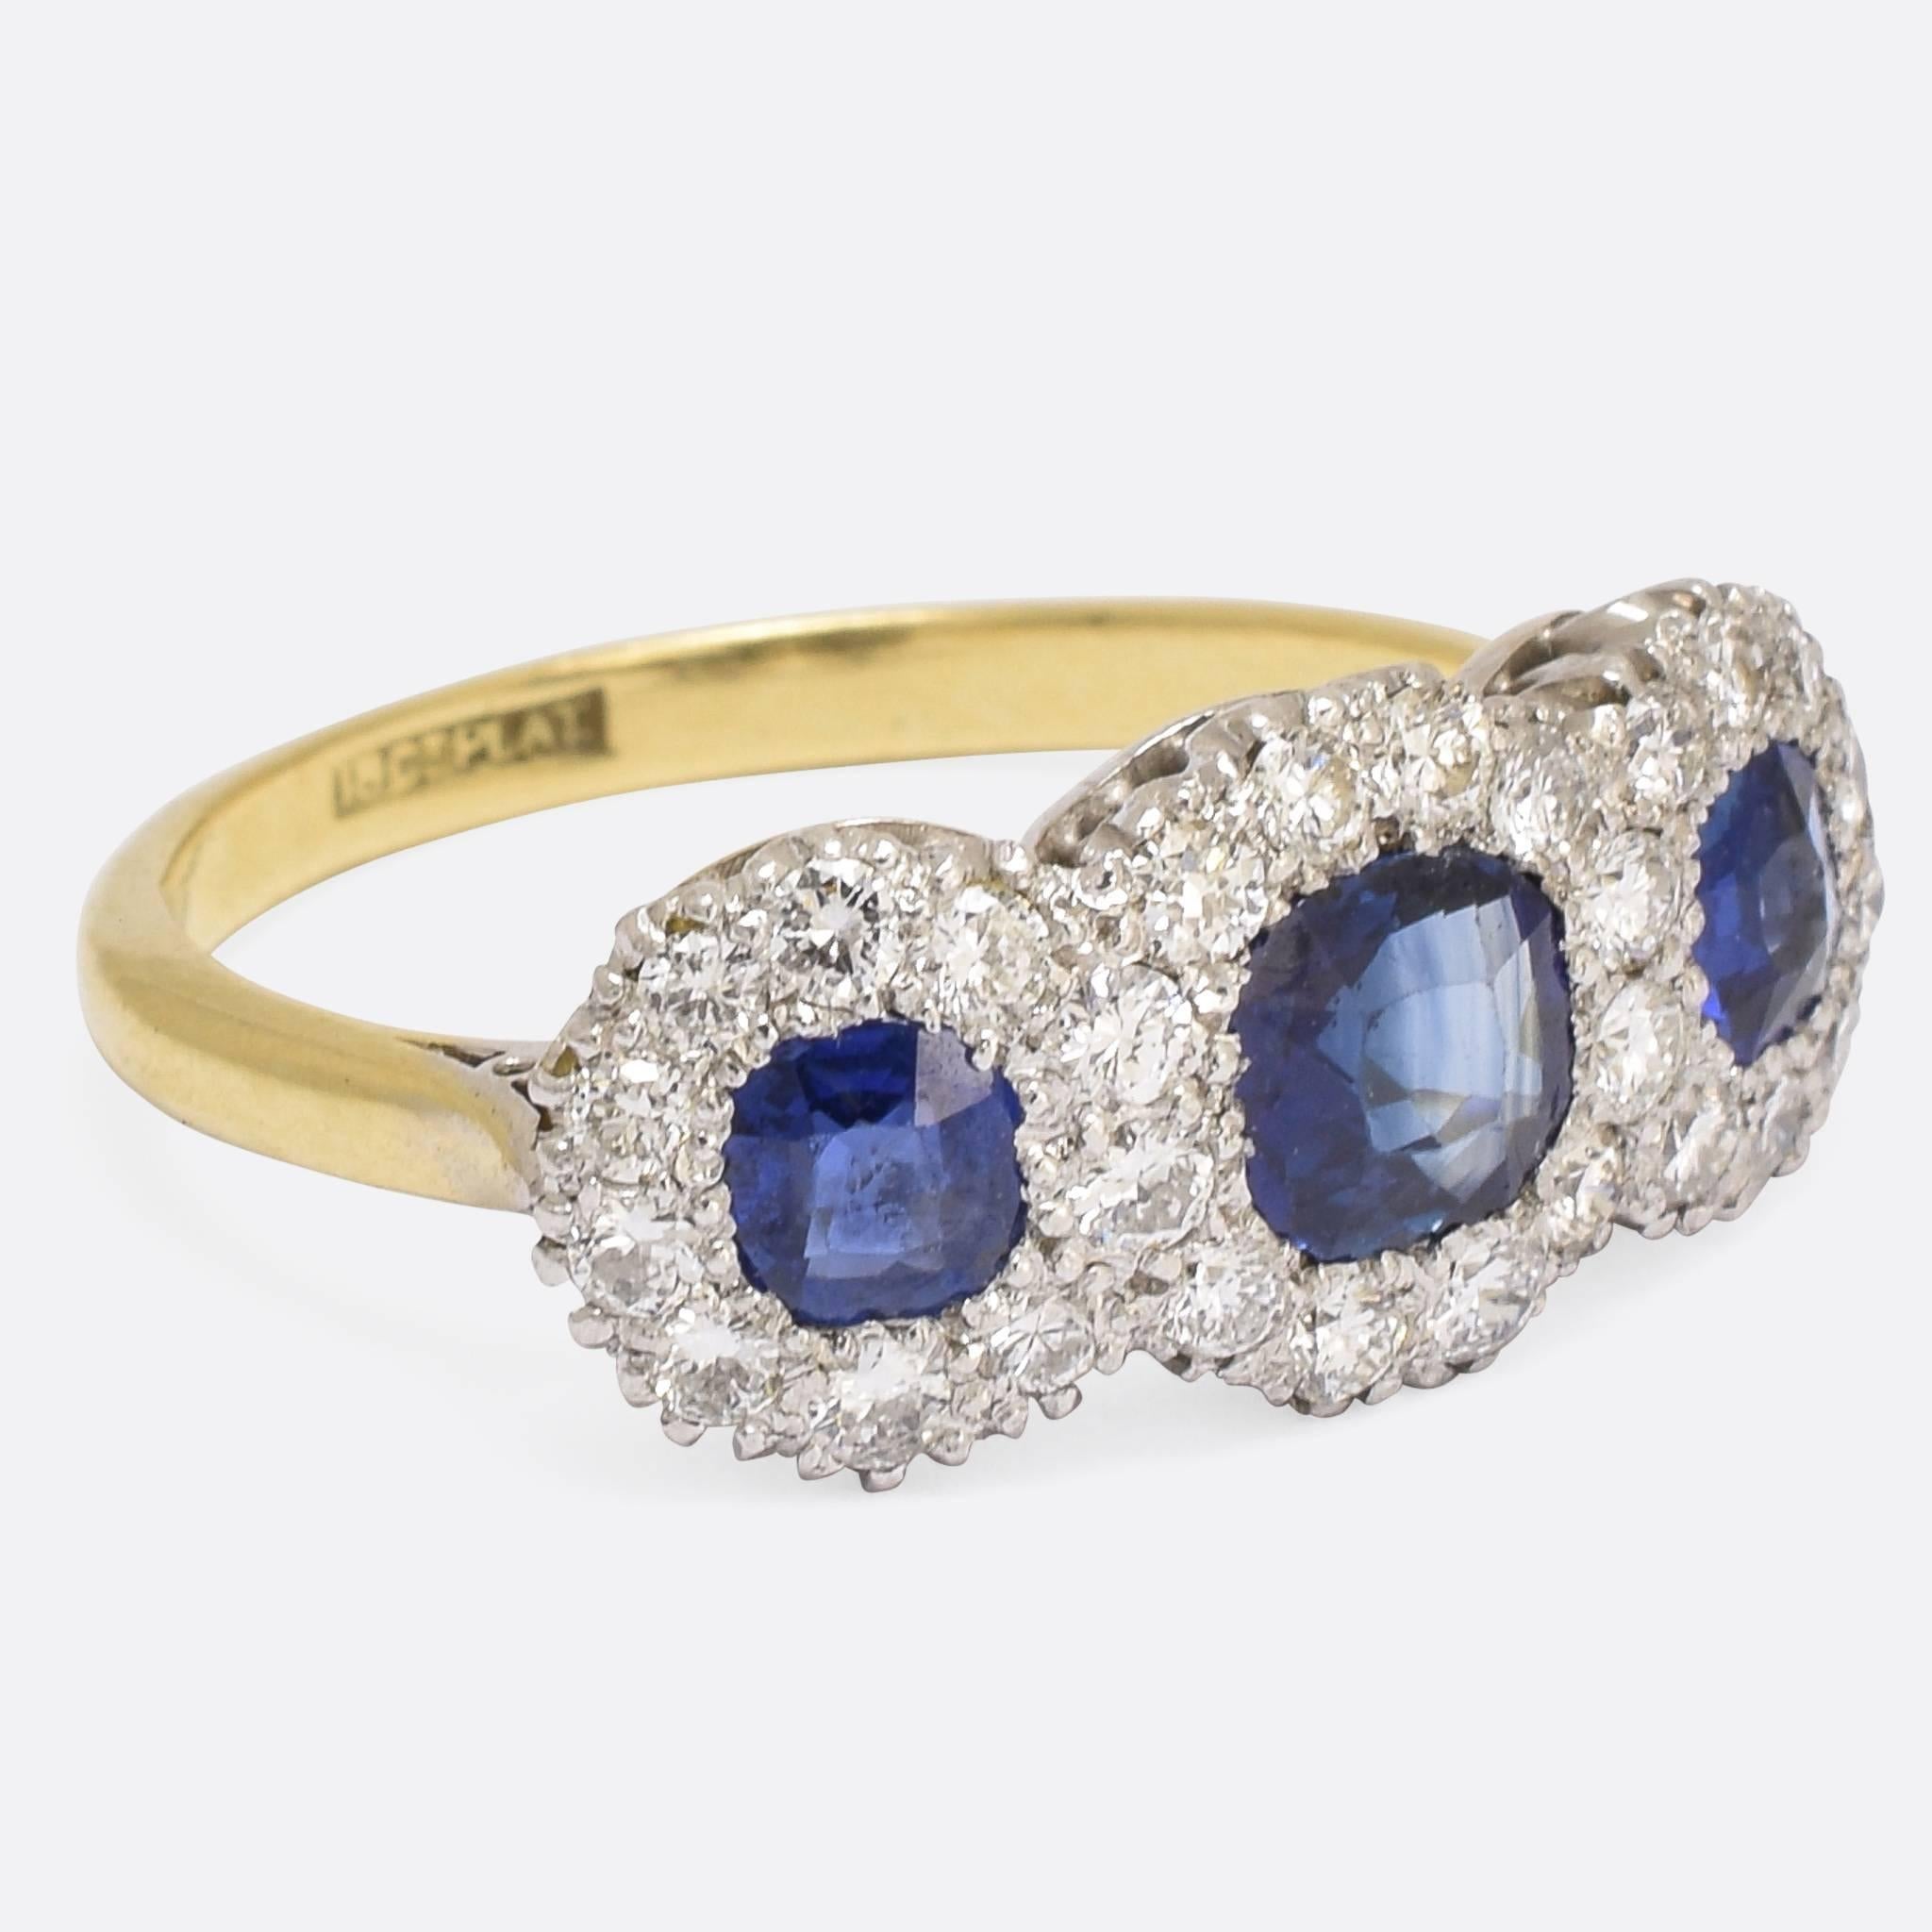 A spectacular antique three-stone cluster ring, set with natural blue sapphires within a cluster of diamonds. An ultra-bling example of the popular trilogy style, this ring was made in the early 20th Century - c.1910 - and is modelled in 18k gold